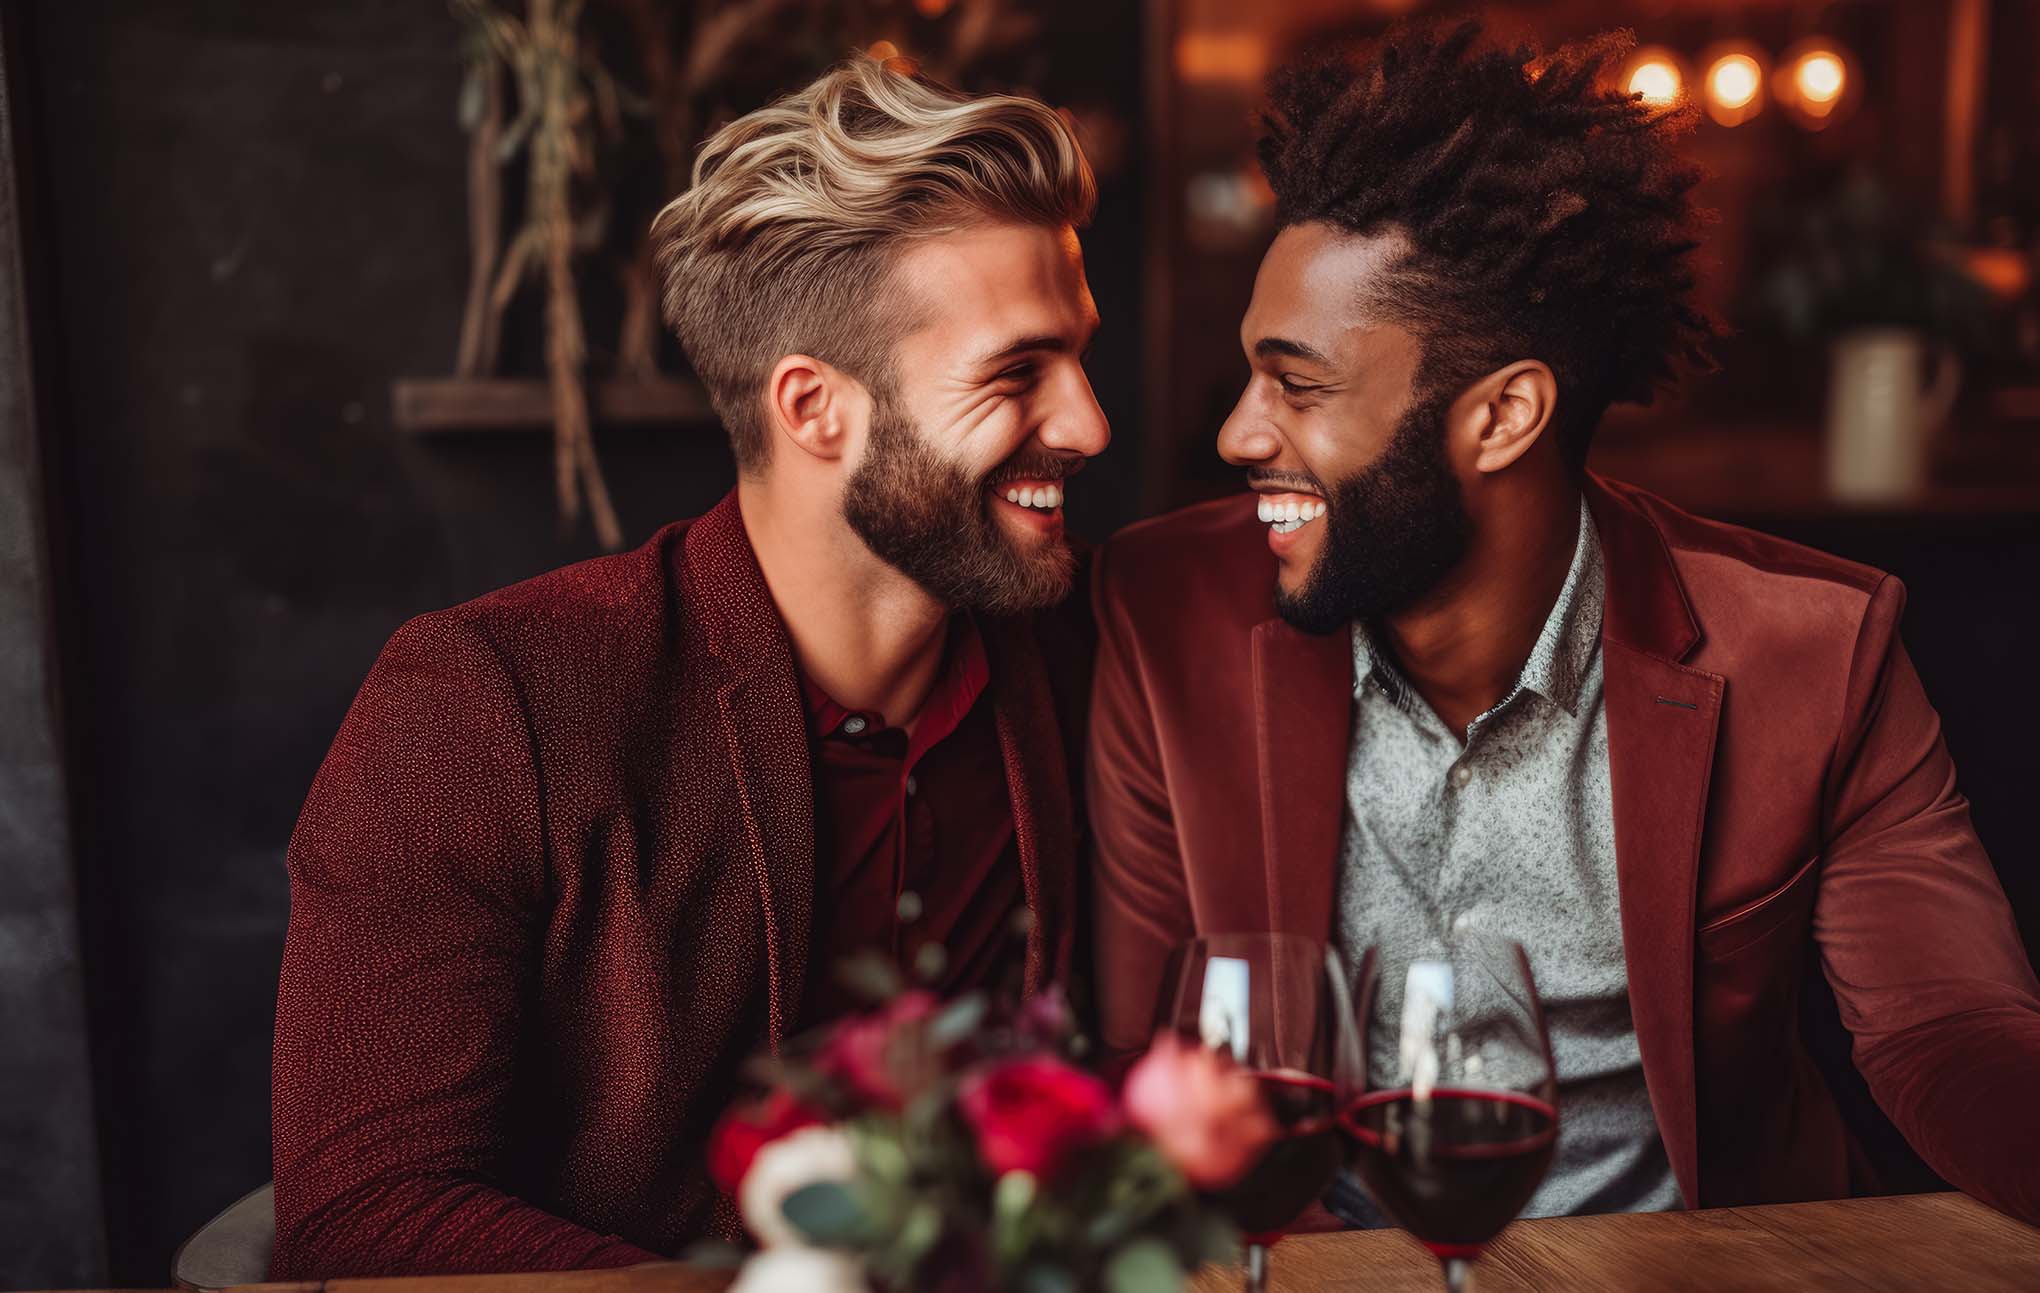 Two men sharing a joyful moment at a restaurant, sitting close together with glasses of red wine. one has blonde hair, the other has dark, curly hair. a bouquet of red roses adds a romantic touch to the scene.